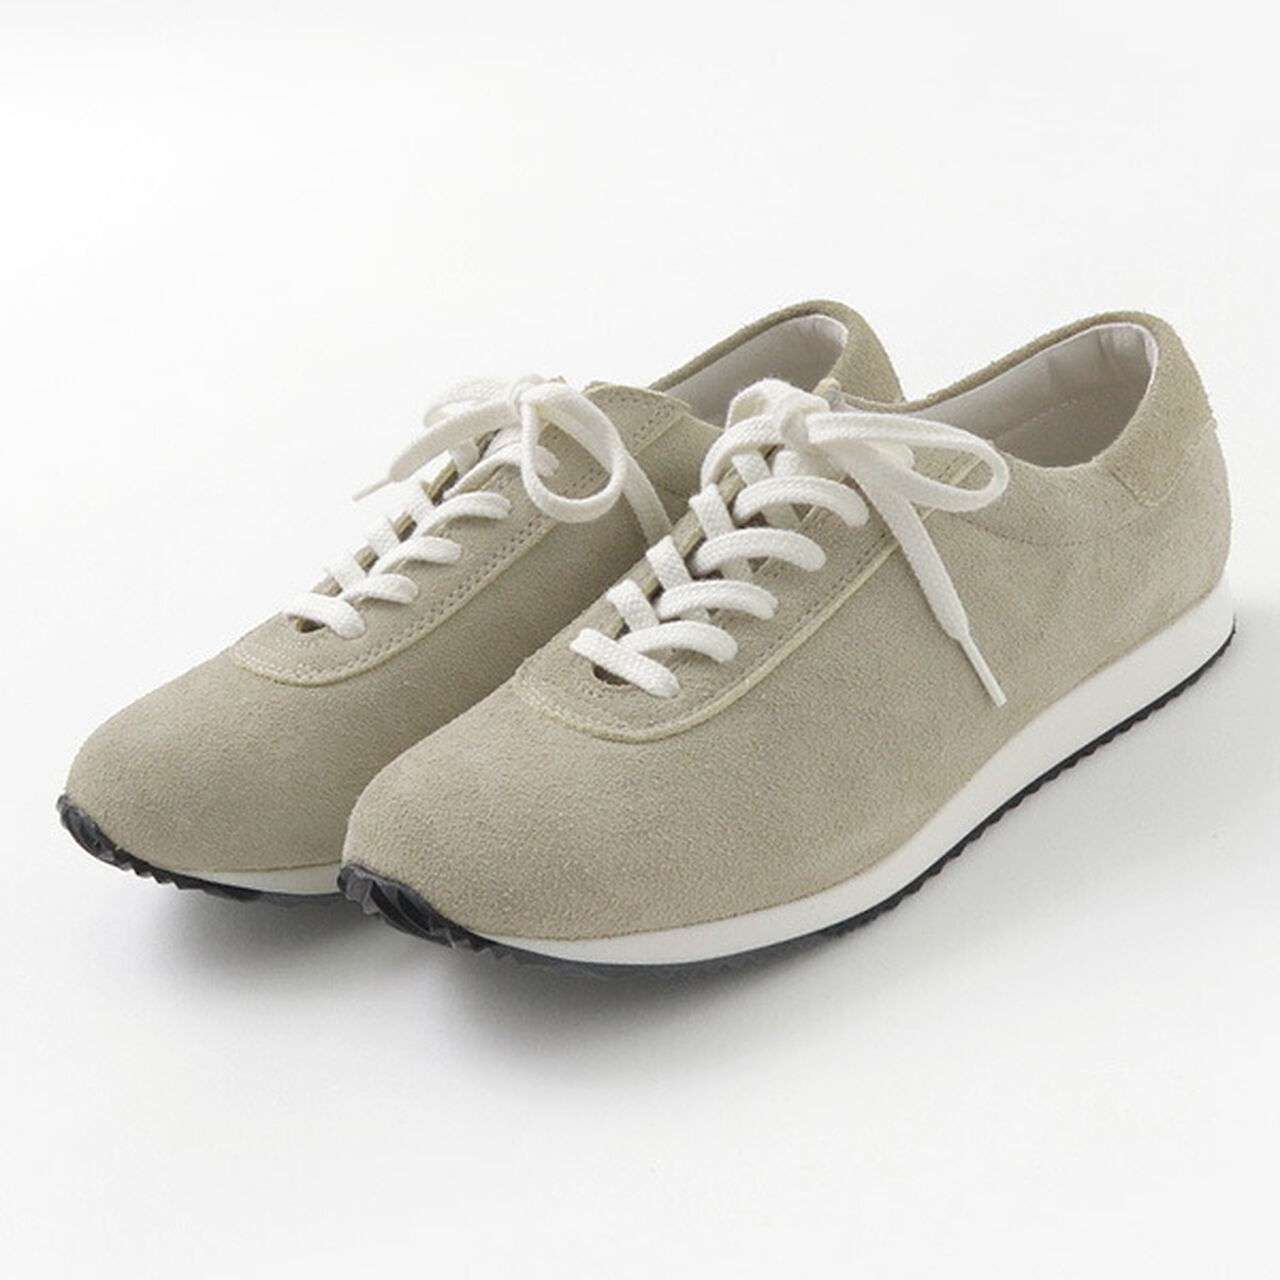 Suede Sneakers MIKEY,Taupe, large image number 0